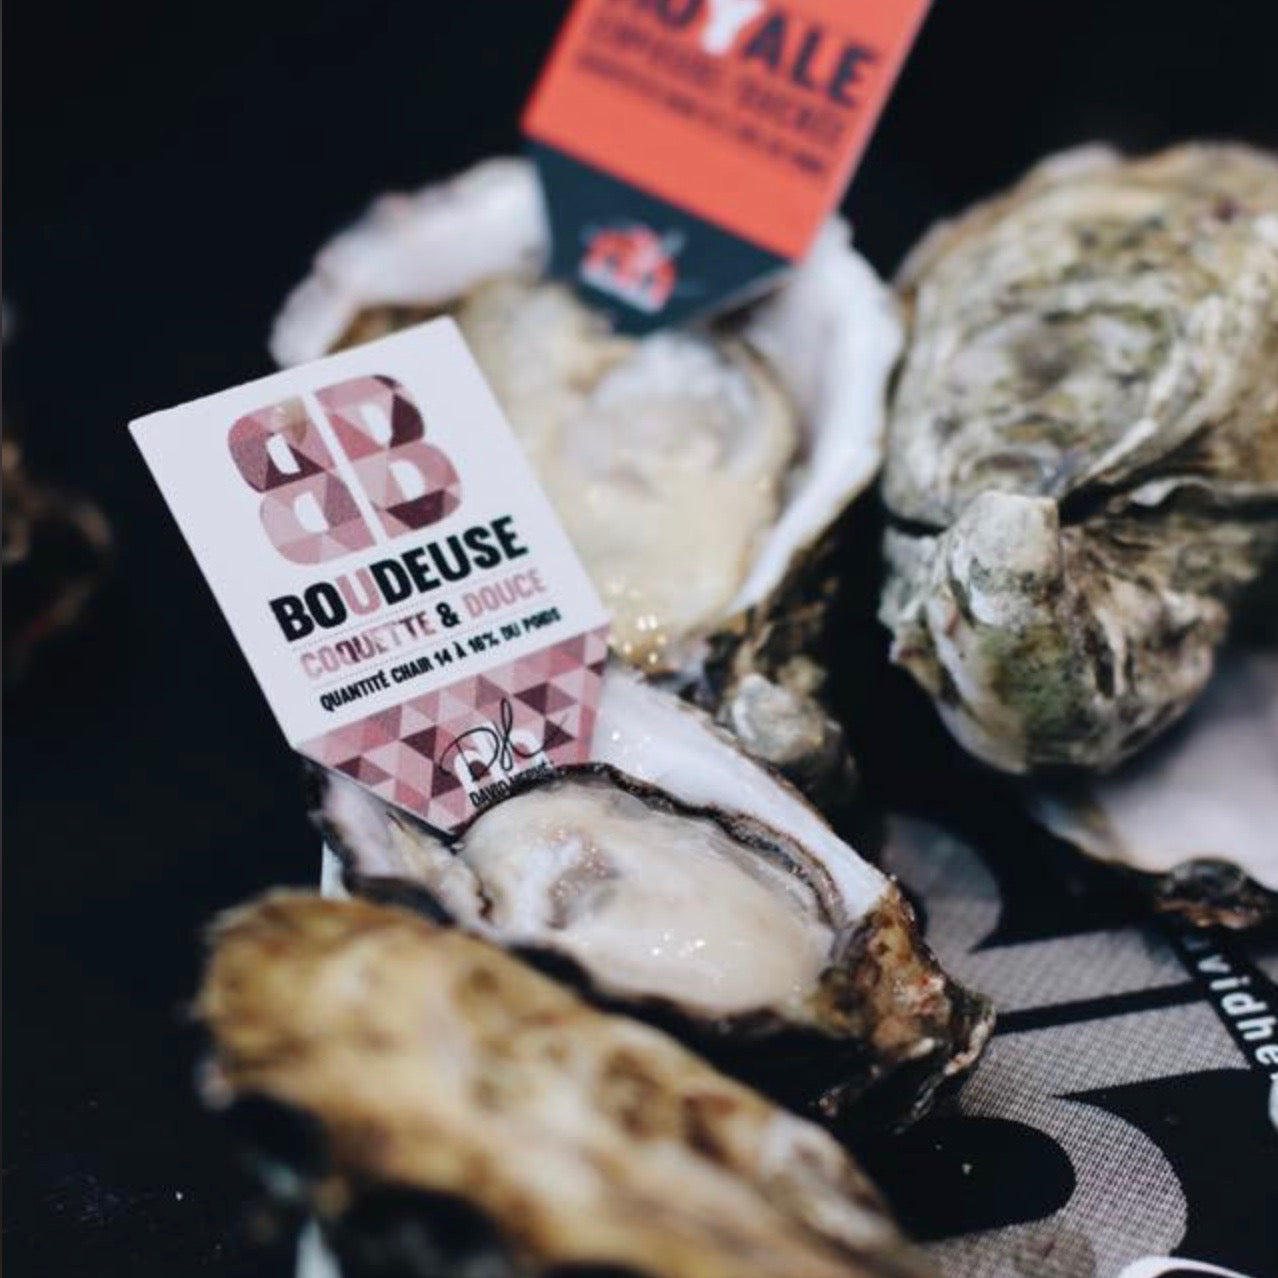 oysters-bb-boudeuse-online-grocery-supermarket-delivery-singapore-thenewgrocer